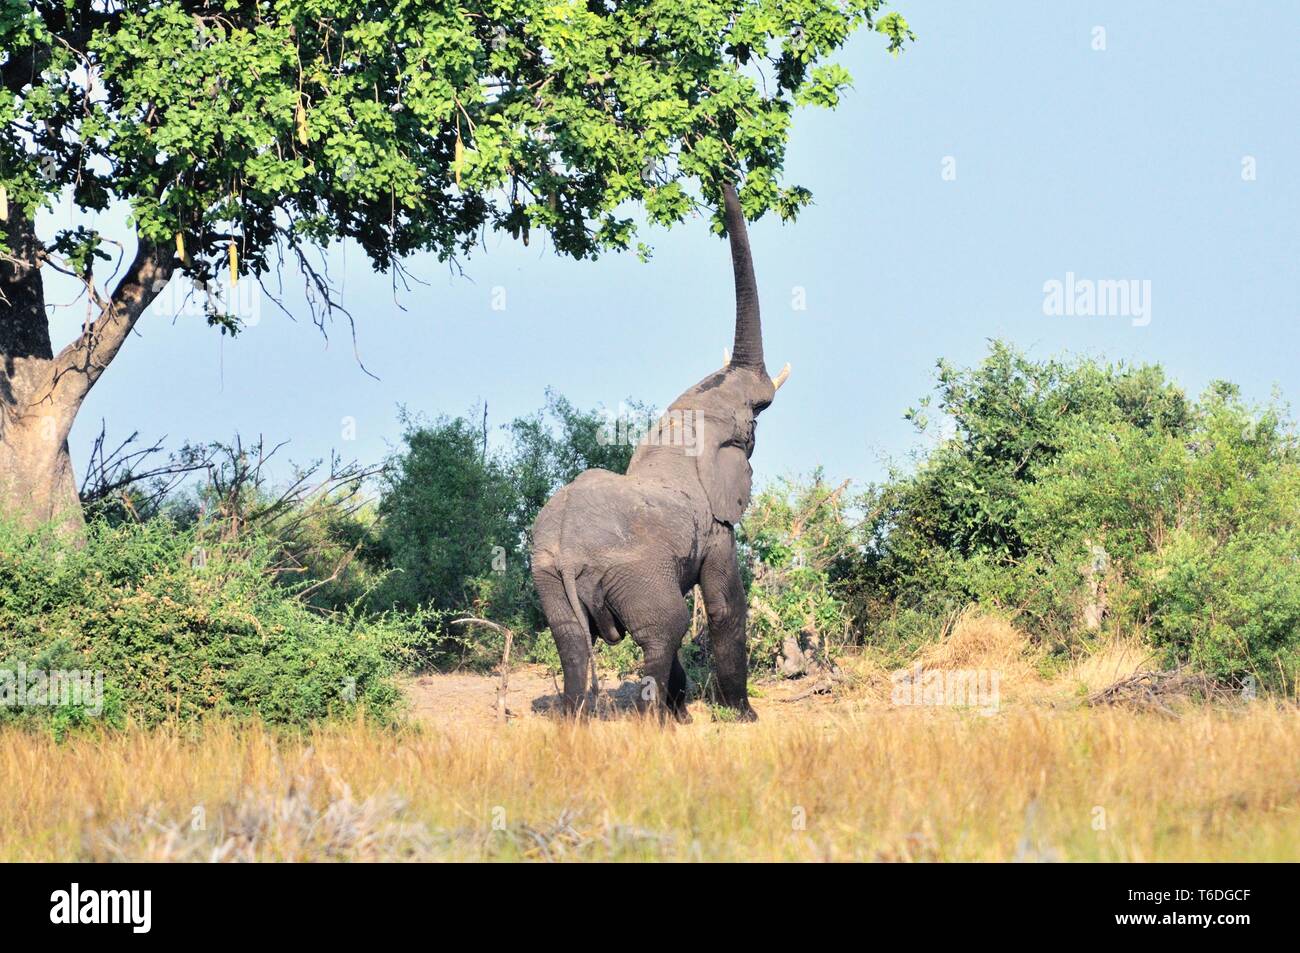 snacking on tree with trunk elephant Stock Photo